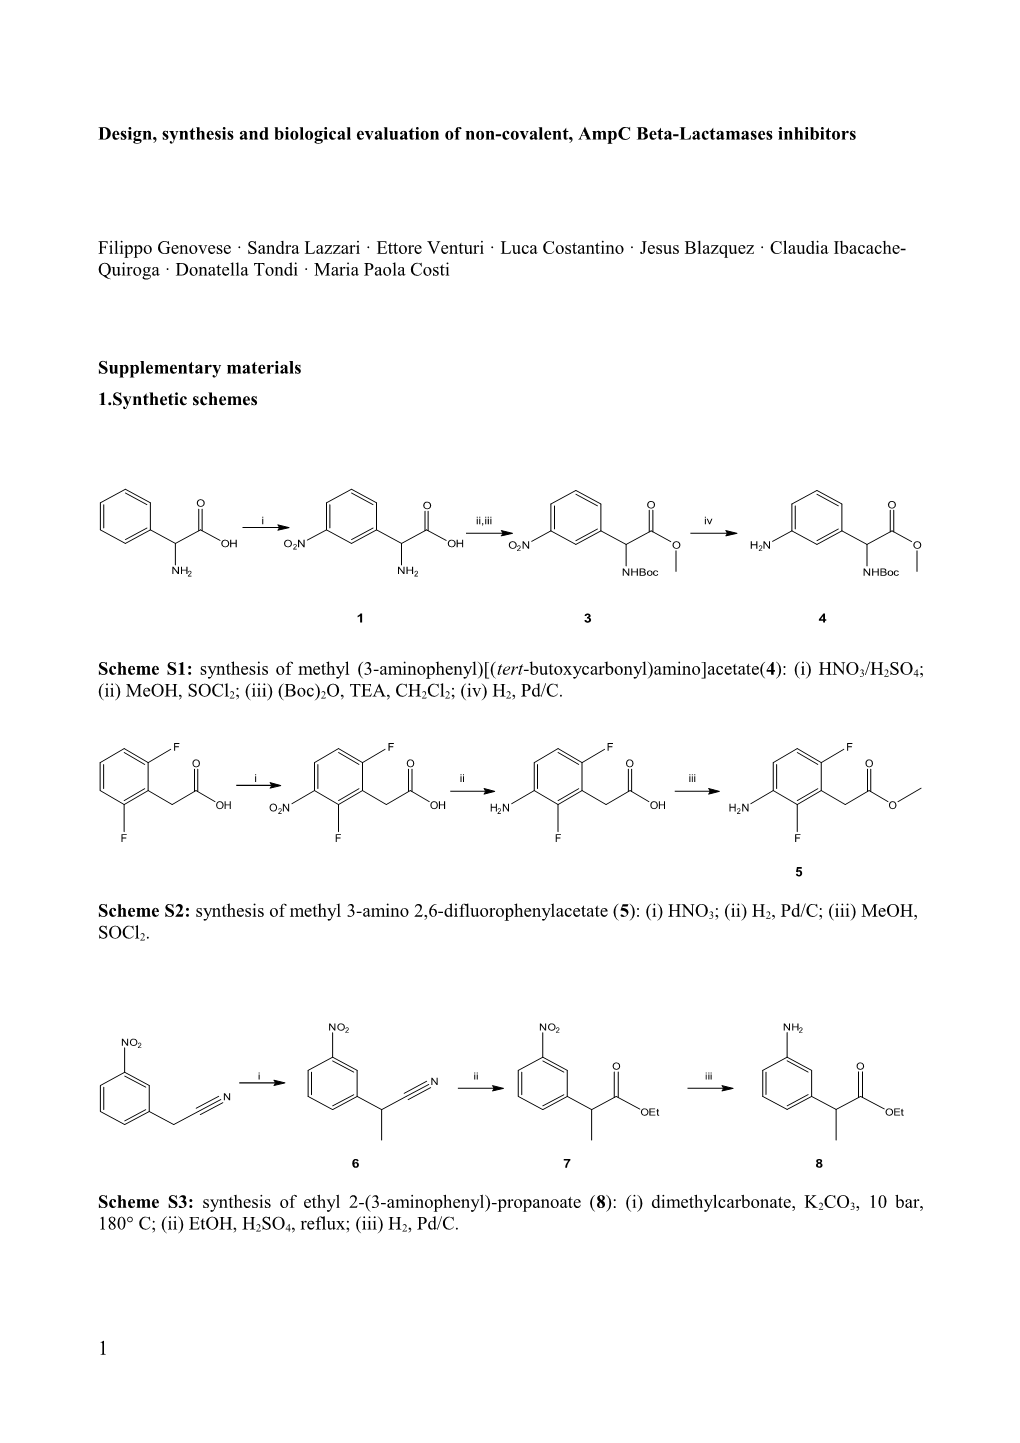 Design, Synthesis and Biological Evaluation of Non-Covalent, Ampc Beta-Lactamases Inhibitors